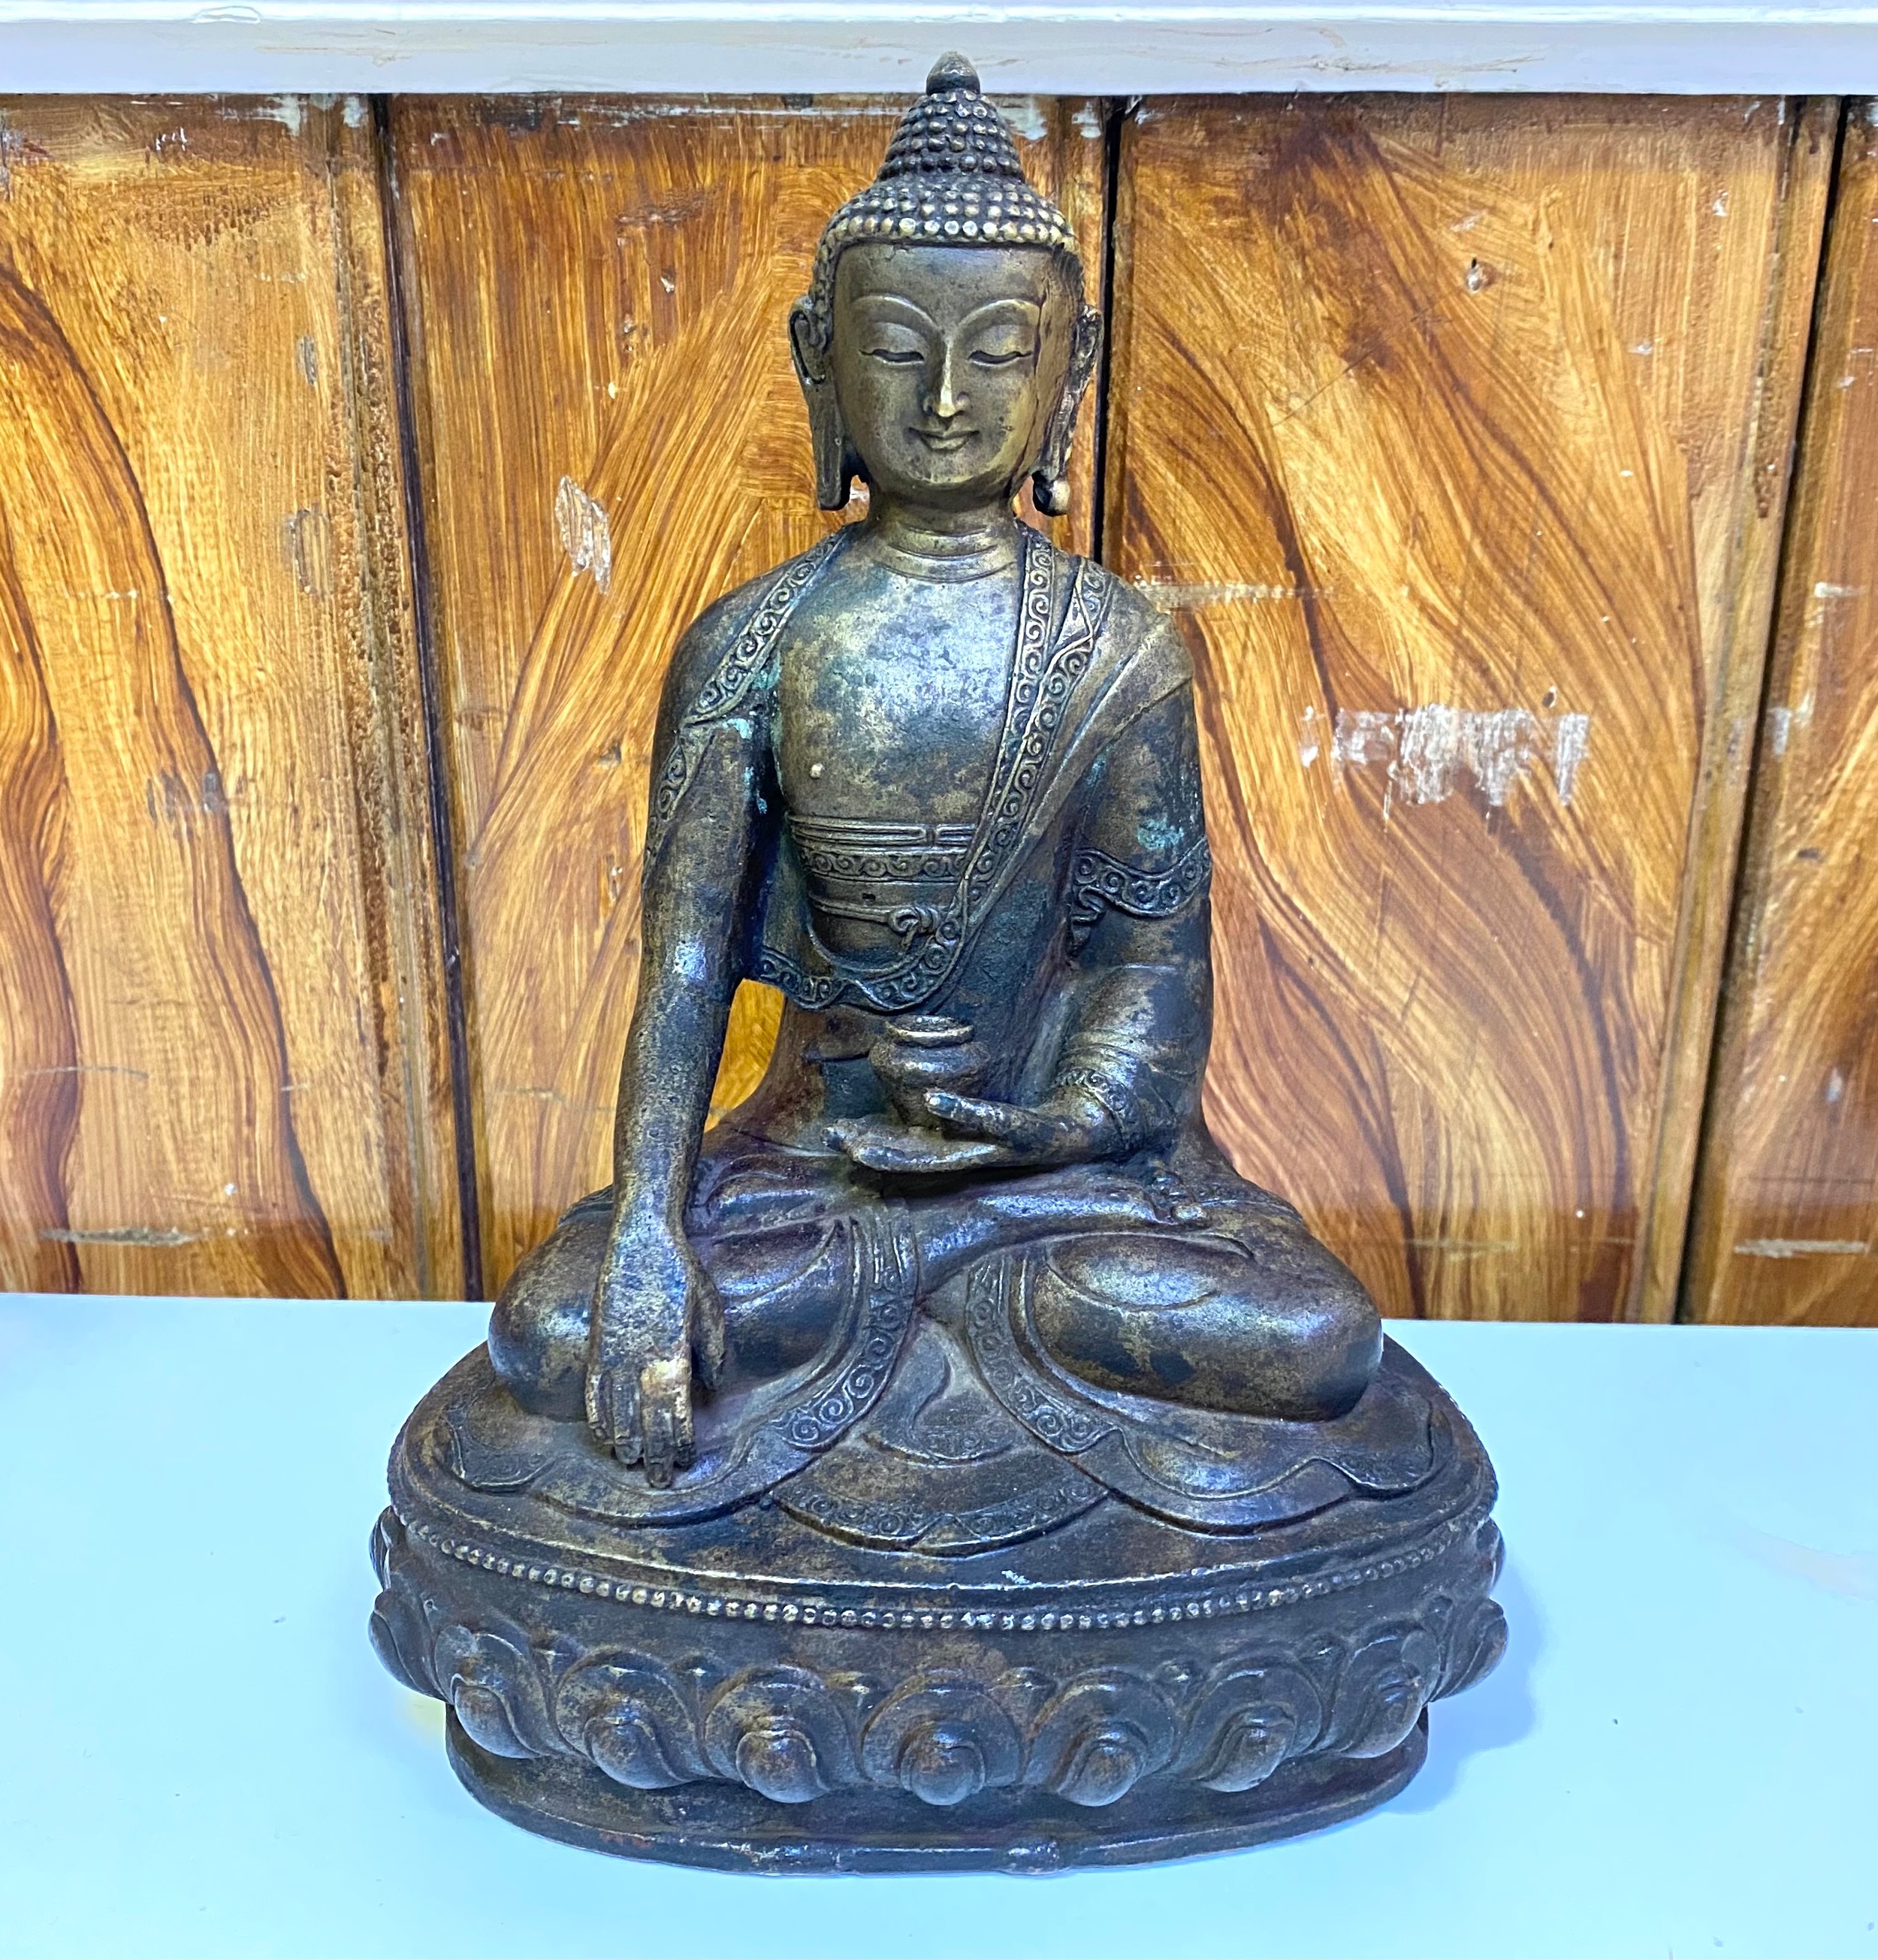 An oriental cast bronze figure of Bodhisattva seated in Dyhanasana, with vase resting on left